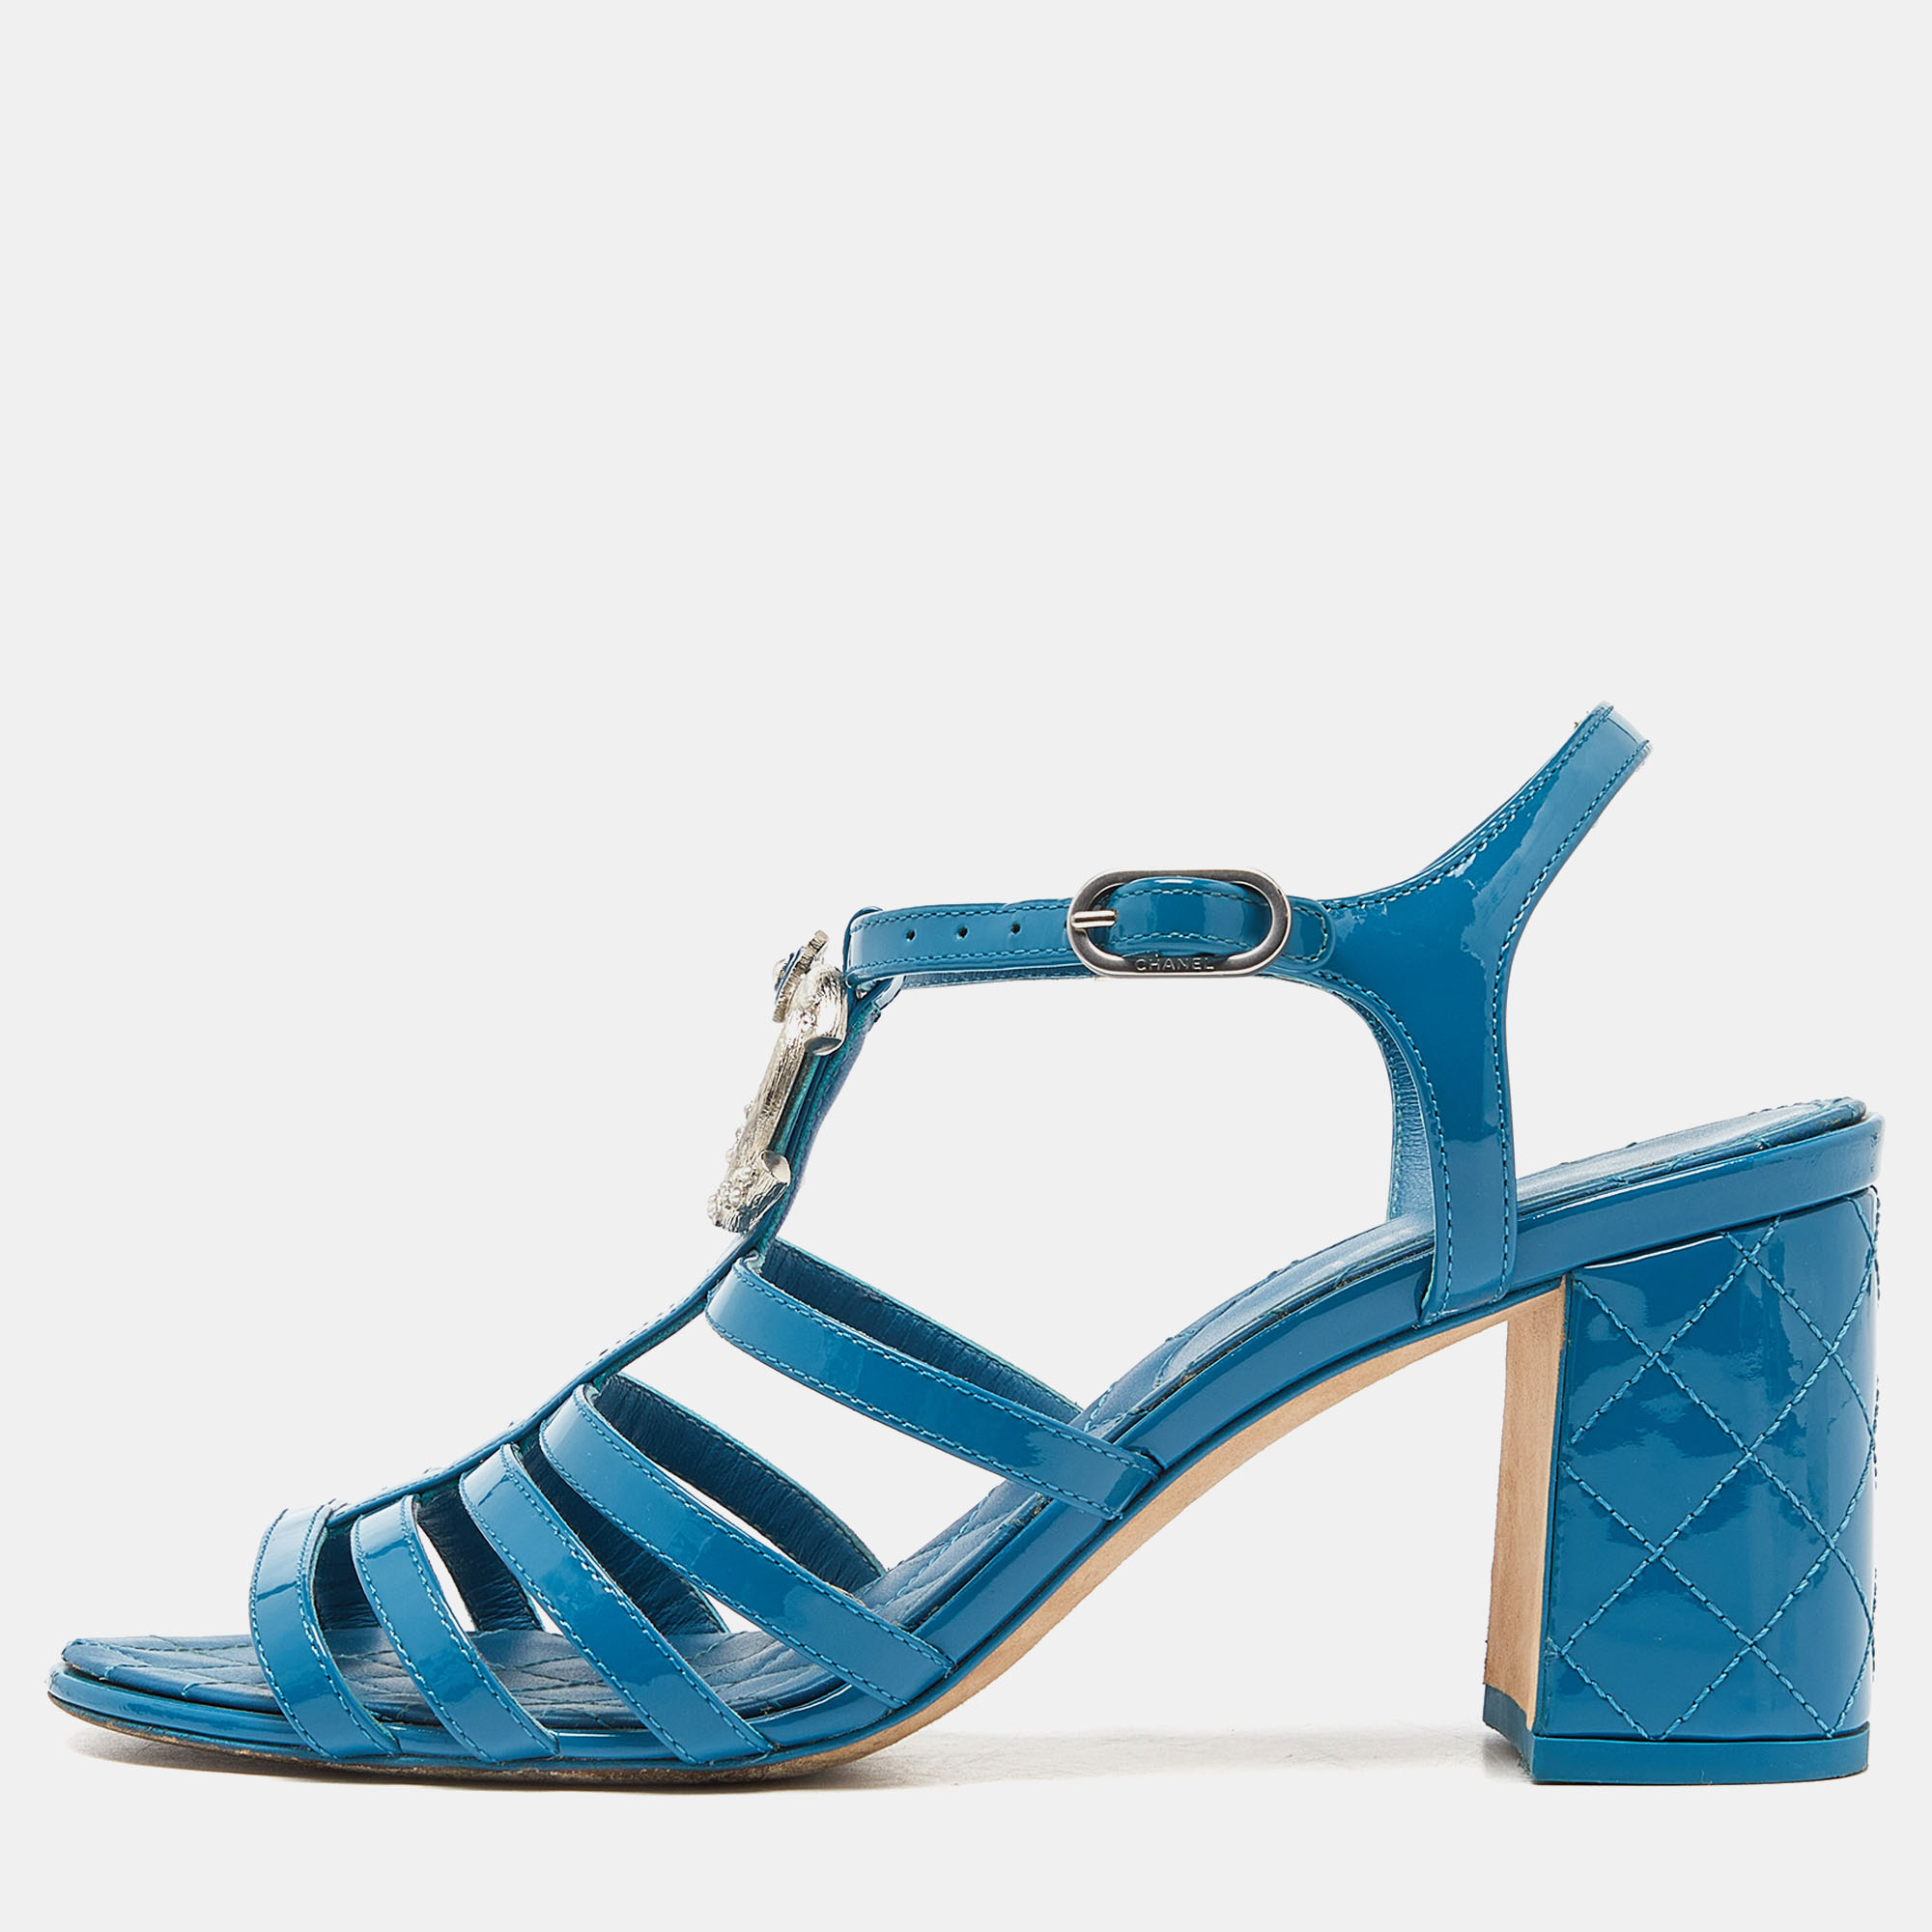 Chanel Blue Patent Leather CC Block Heel Strappy Sandals Size 37